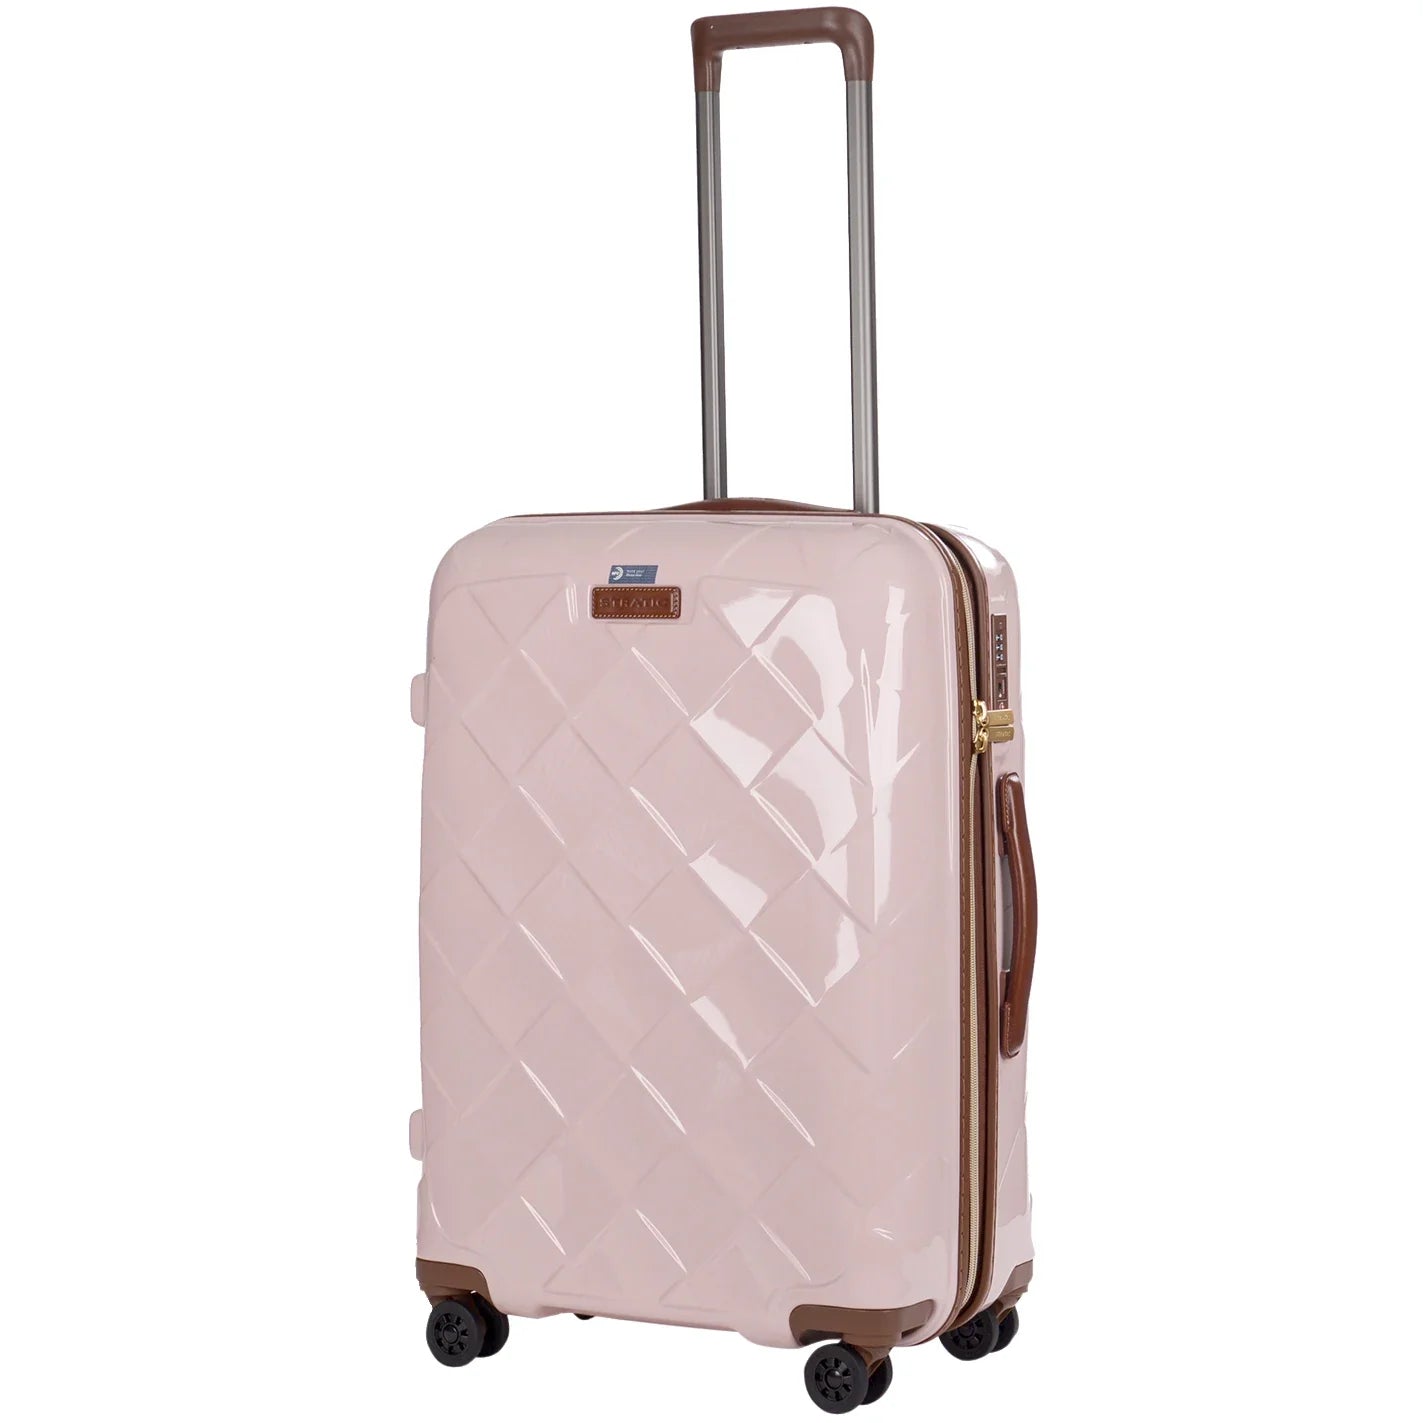 Stratic Leather & More 4-wheel trolley 66 cm - rose